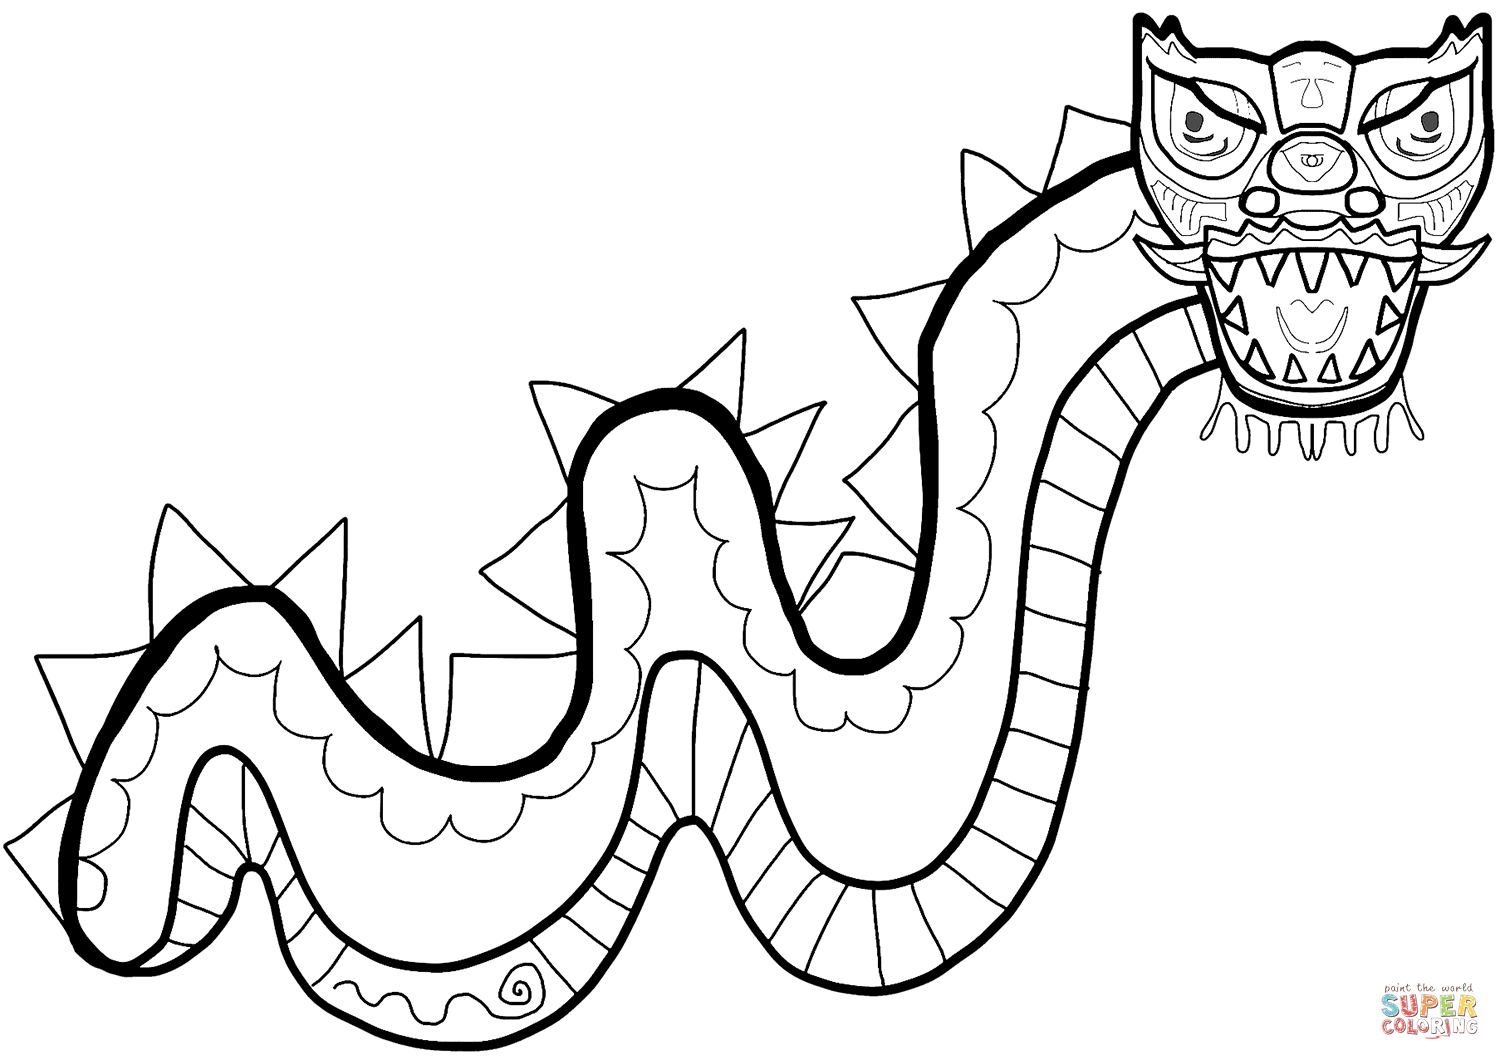 Chinese New Year Dragon coloring page | Free Printable ...